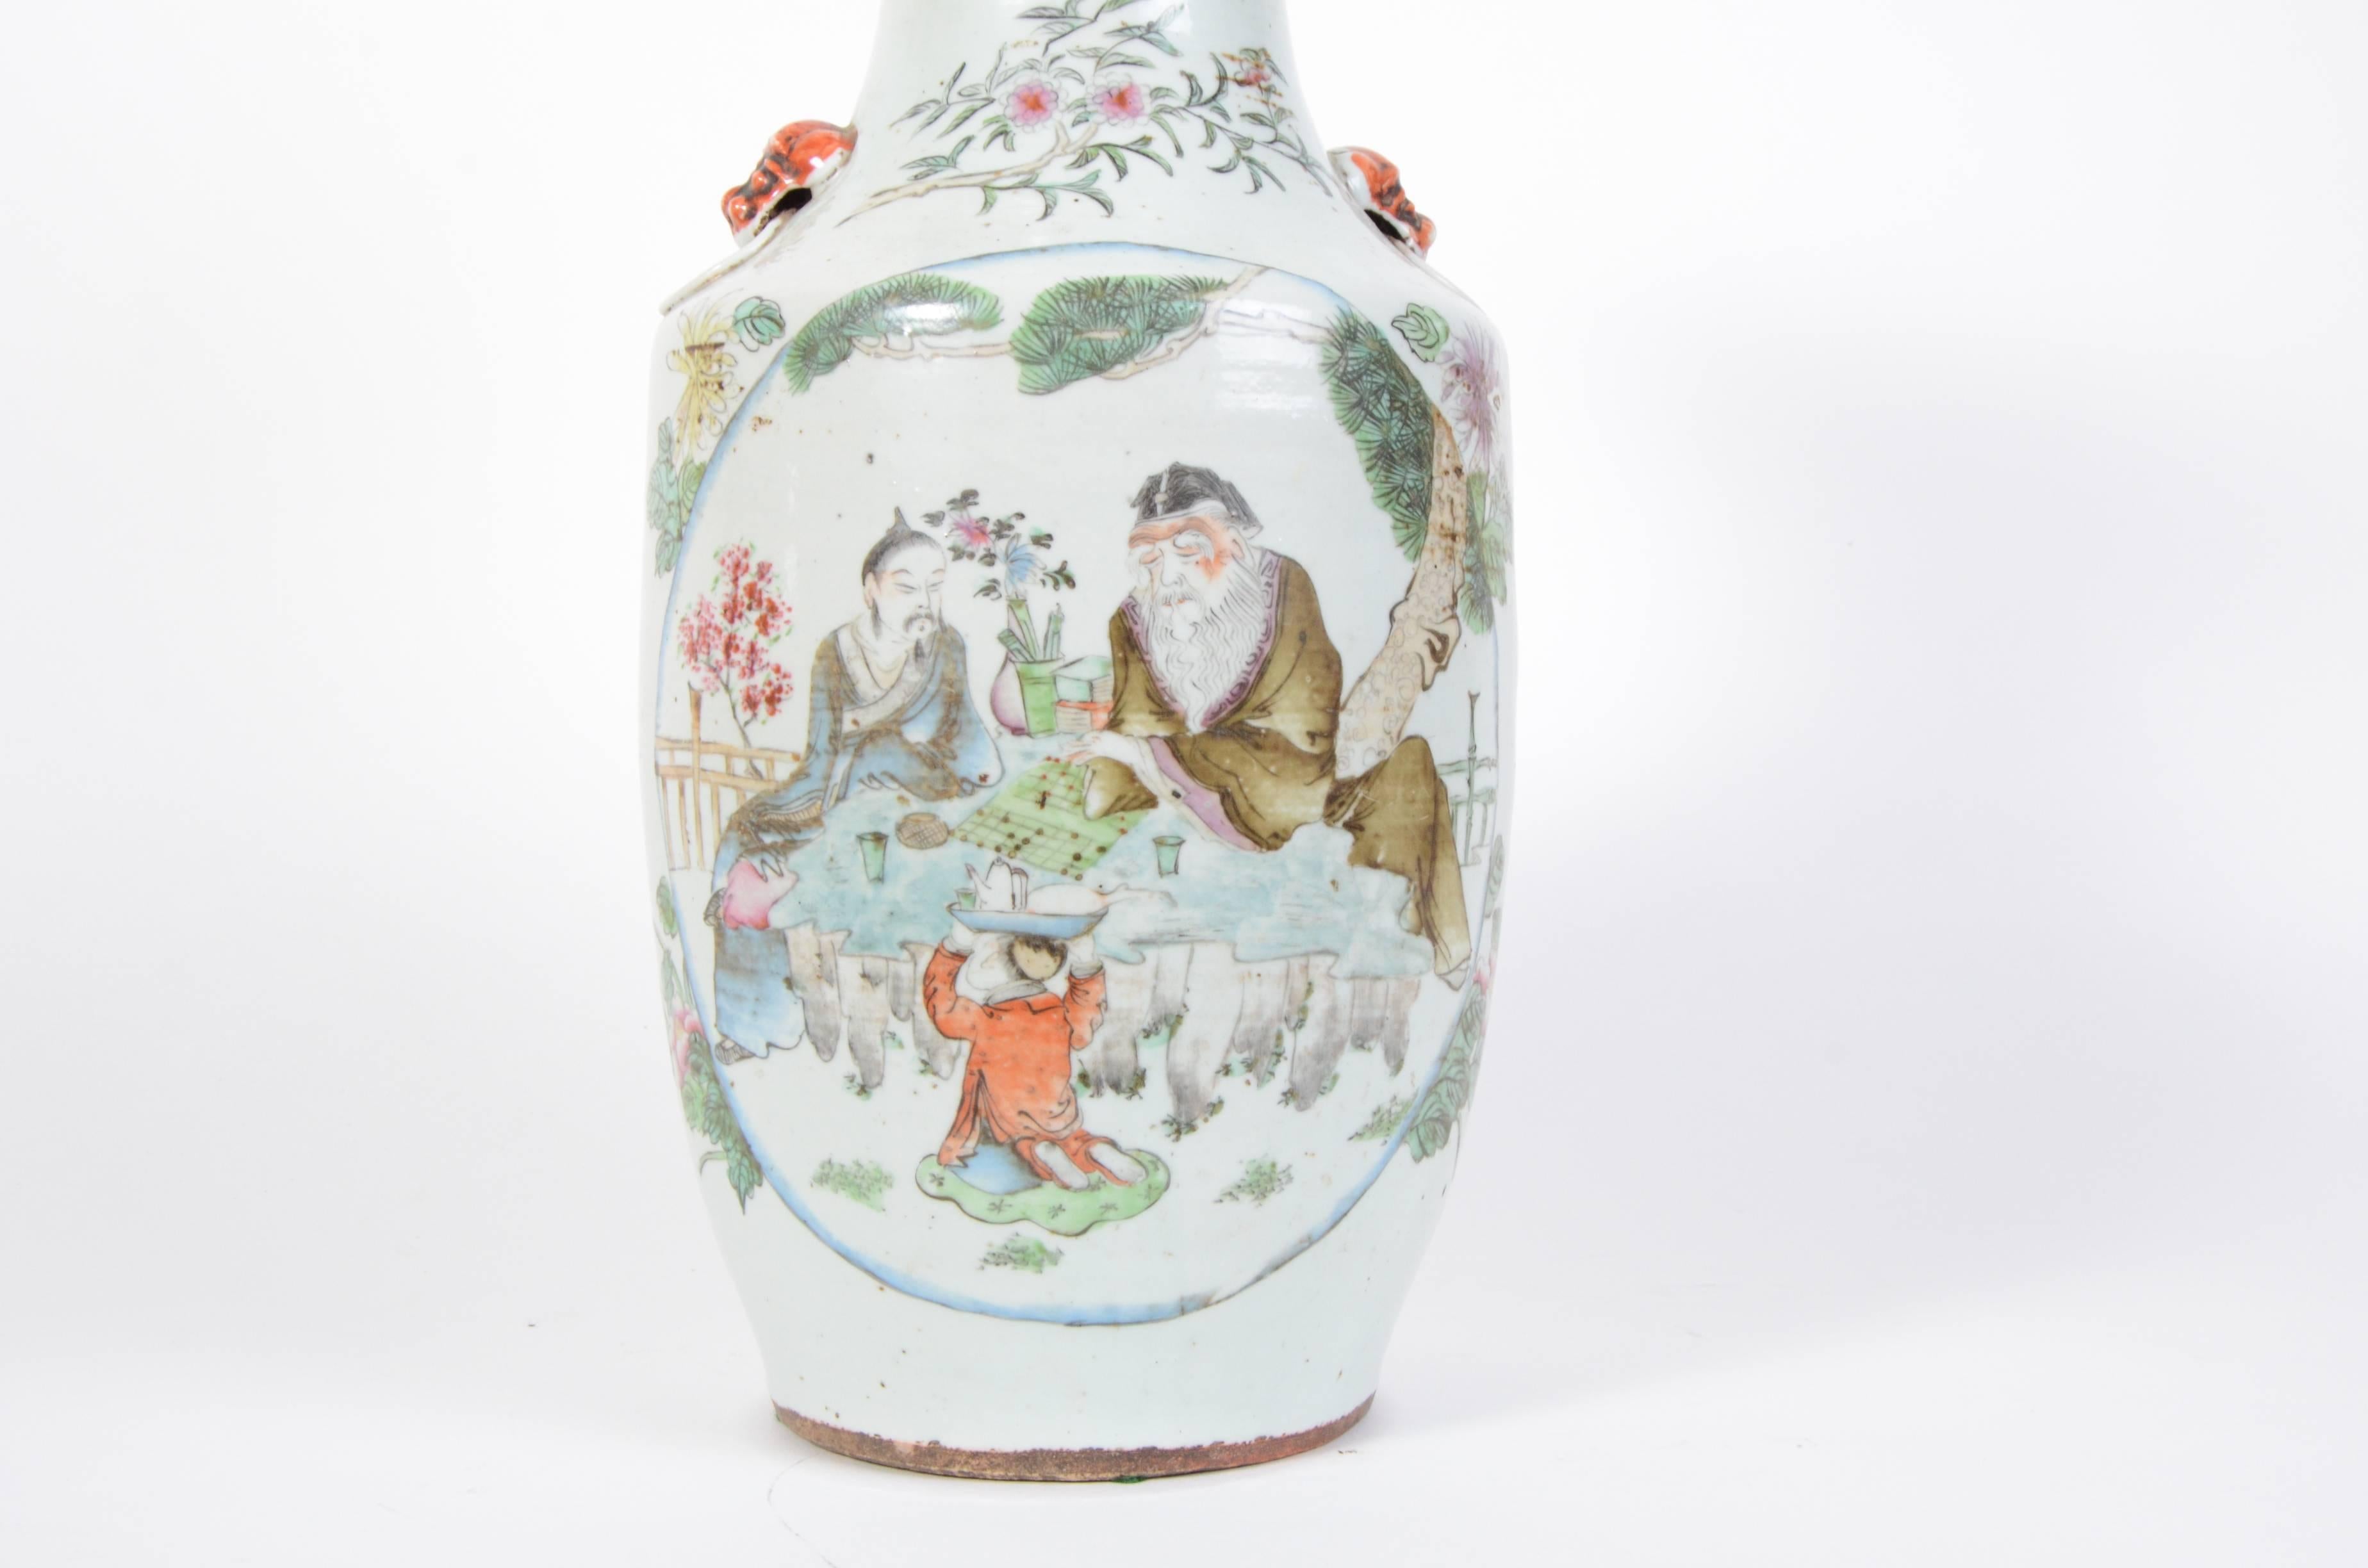 A late 19th century Chinese export porcelain vase. This polychromed scene depicts two-seat scholars or elders with a young servant.